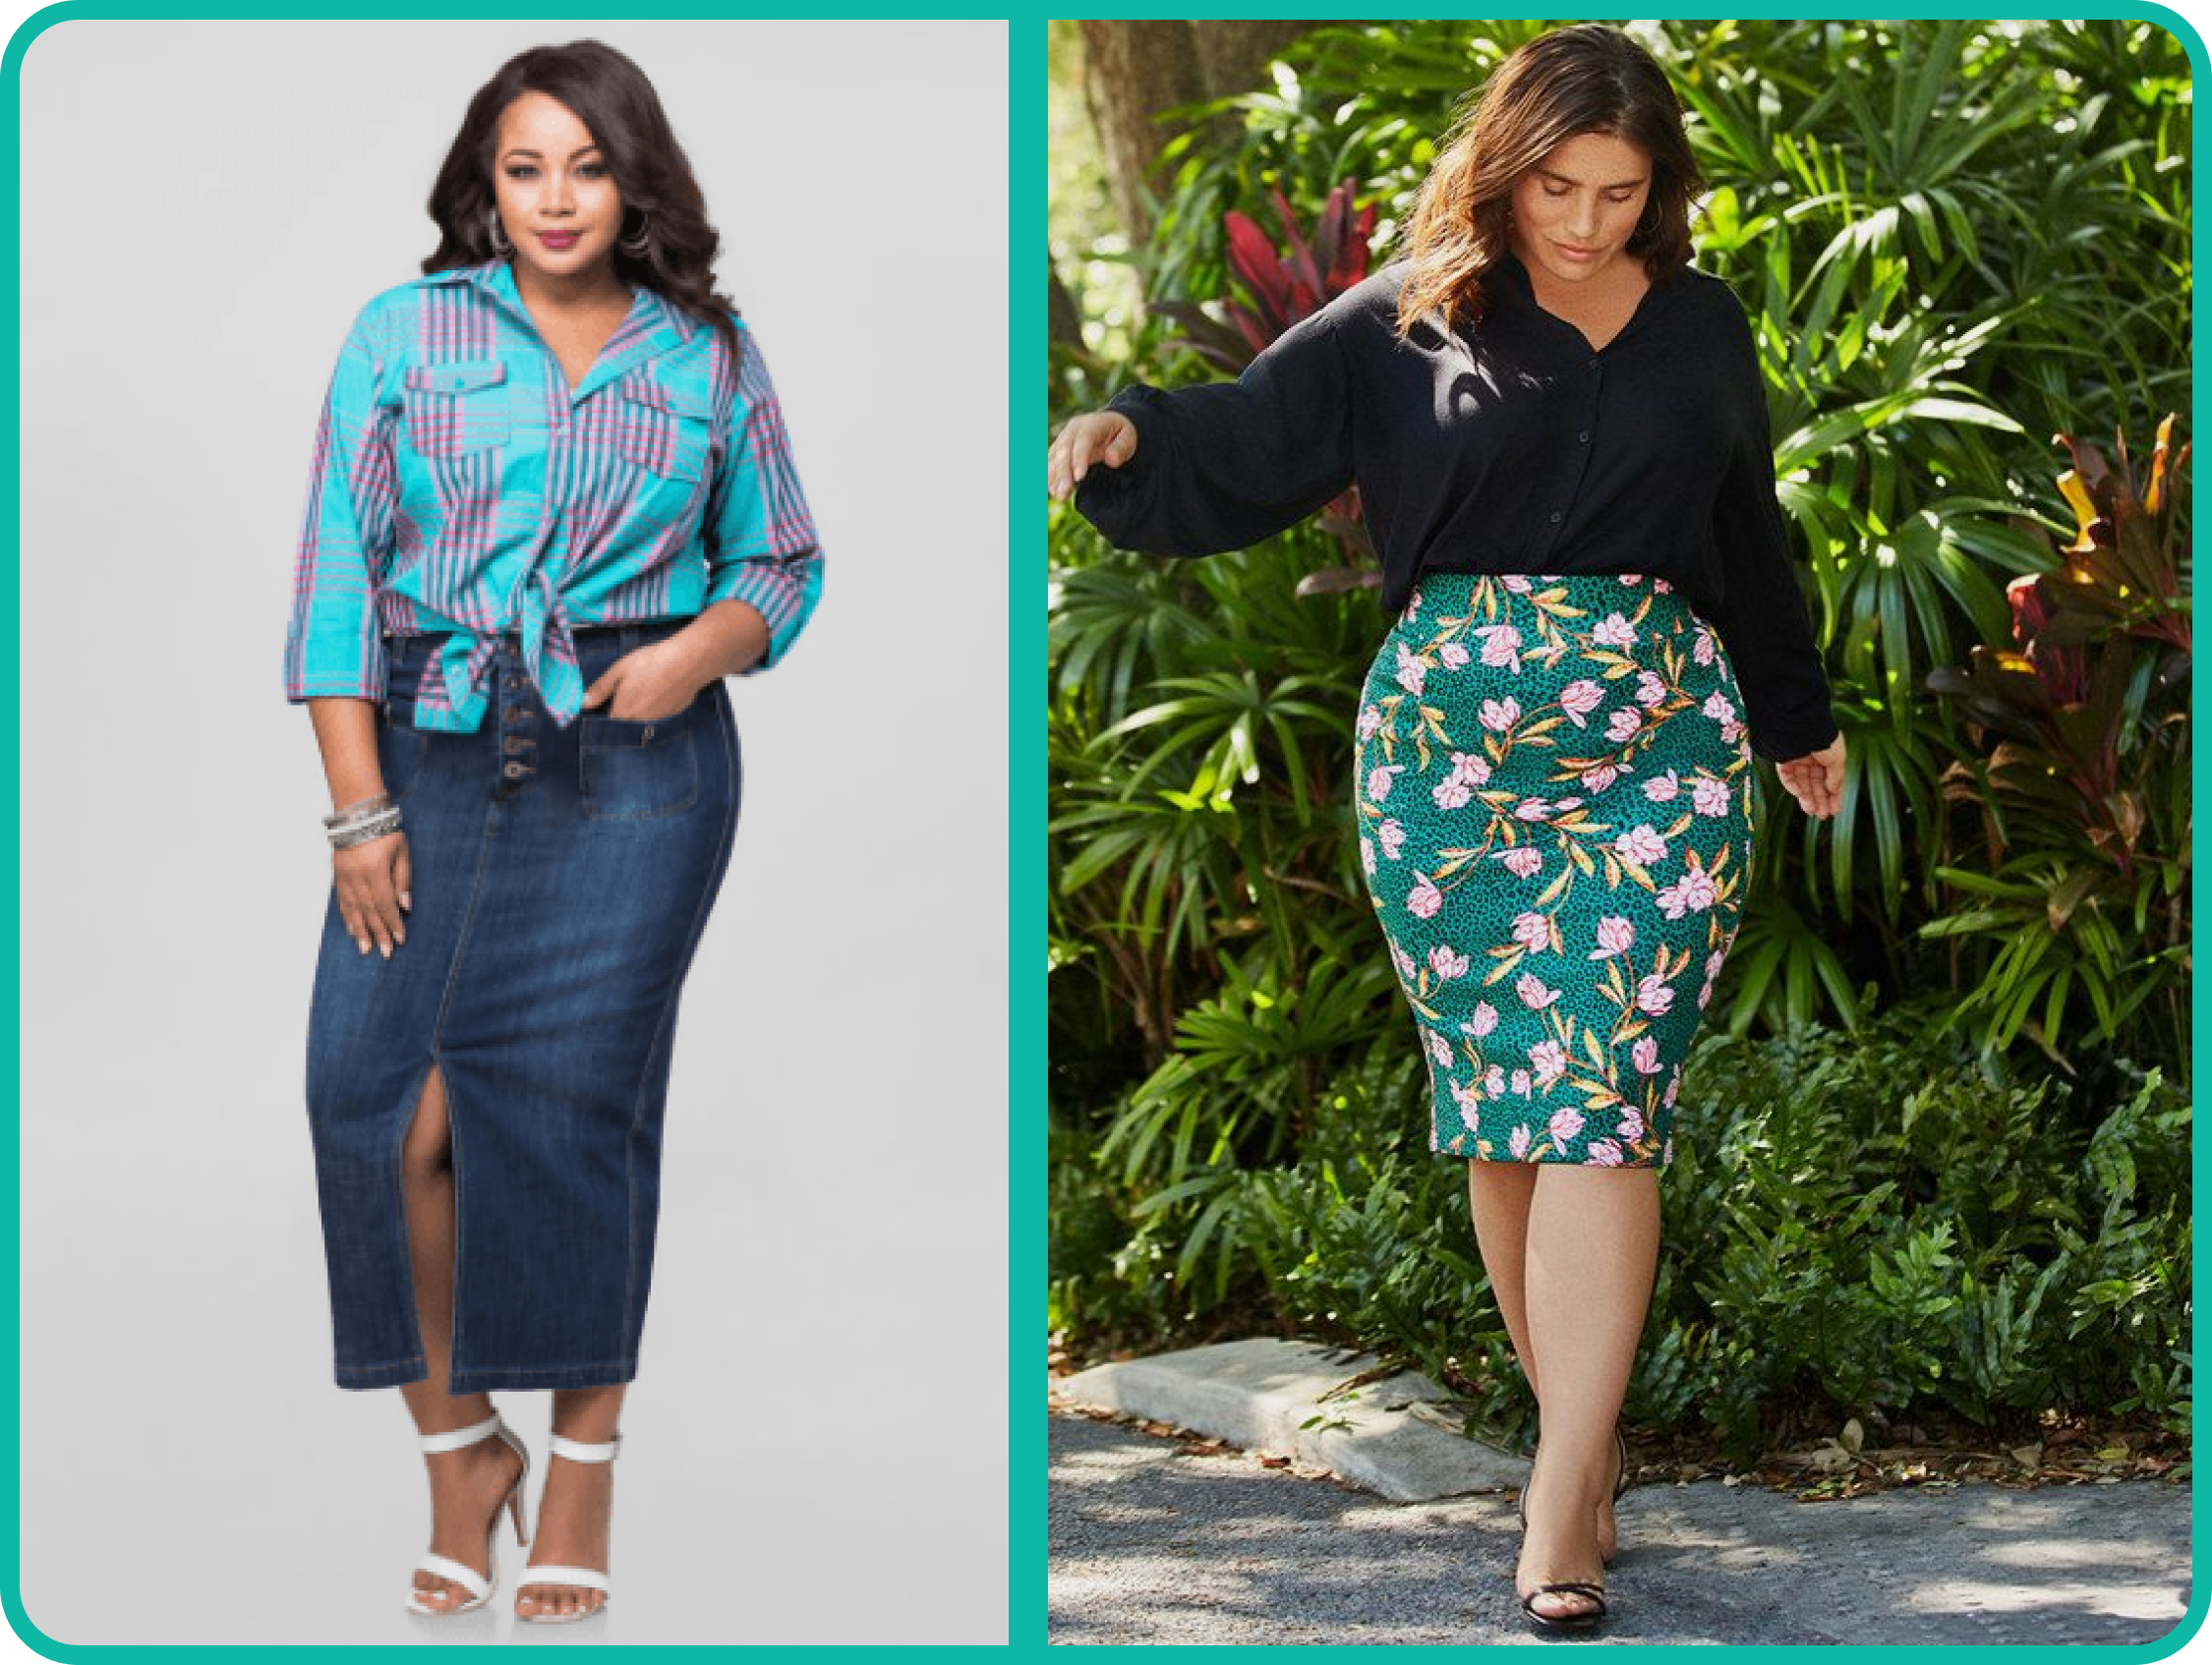 Pencil skirt and denim maxi skirt for plus size women